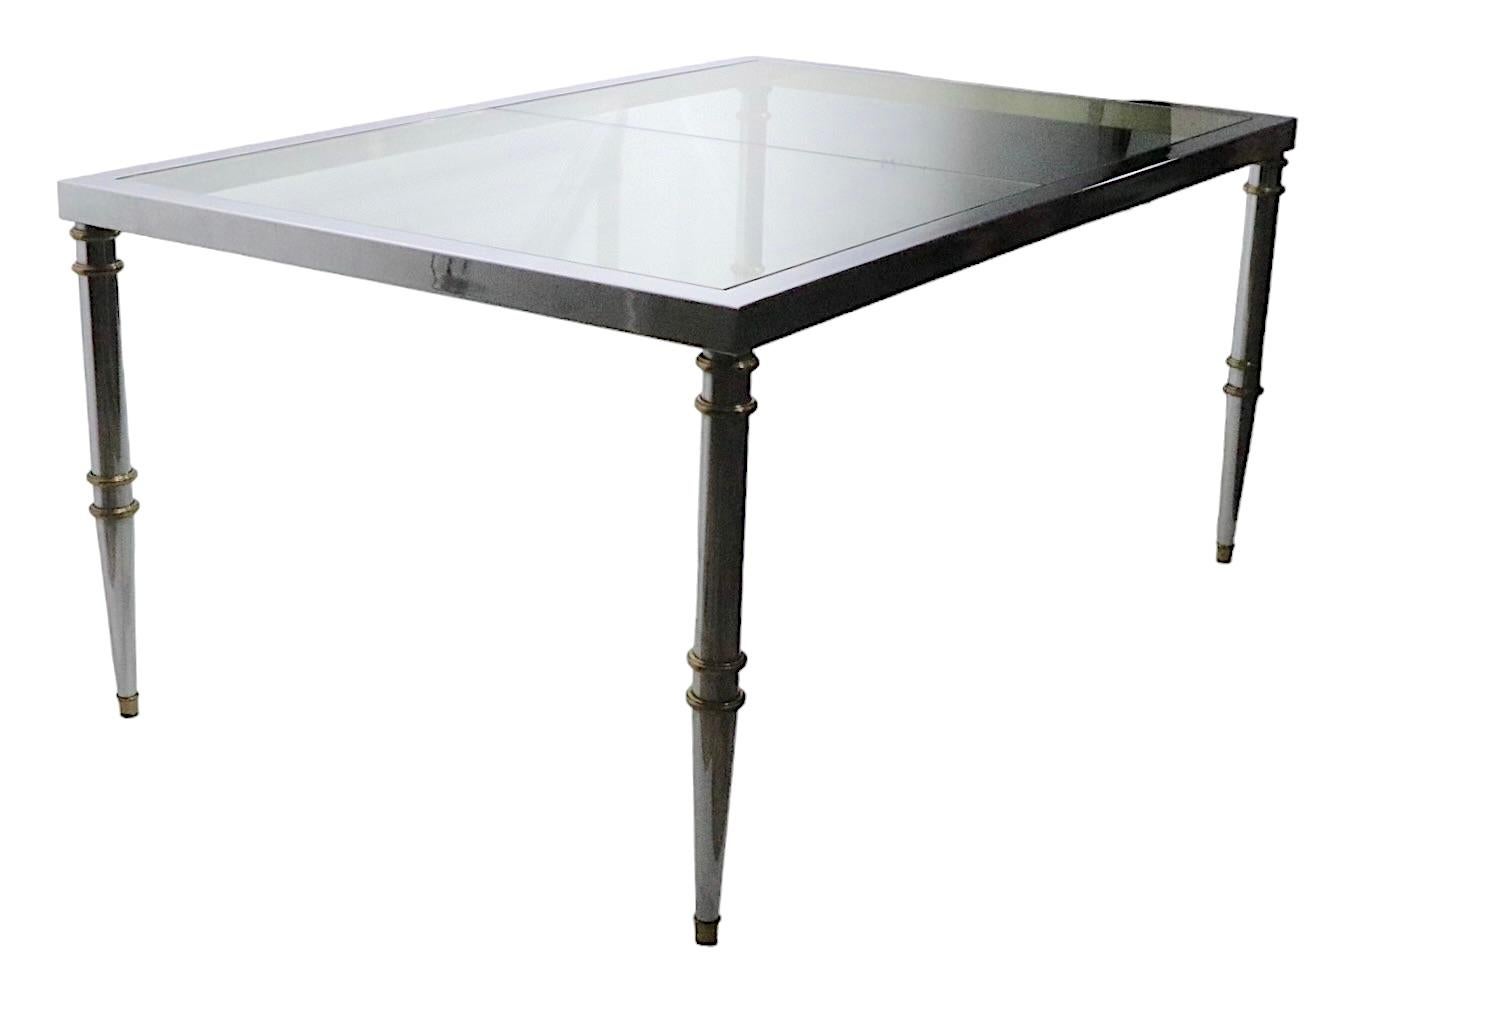 Exceptional chrome, brass and glass extension dining table in the manner of Maison Jansen, probably made in Italy, circa 1970s - unsigned. The table has tapering pole legs, with brass rings and bras feet. The chrome top has a brass interior which